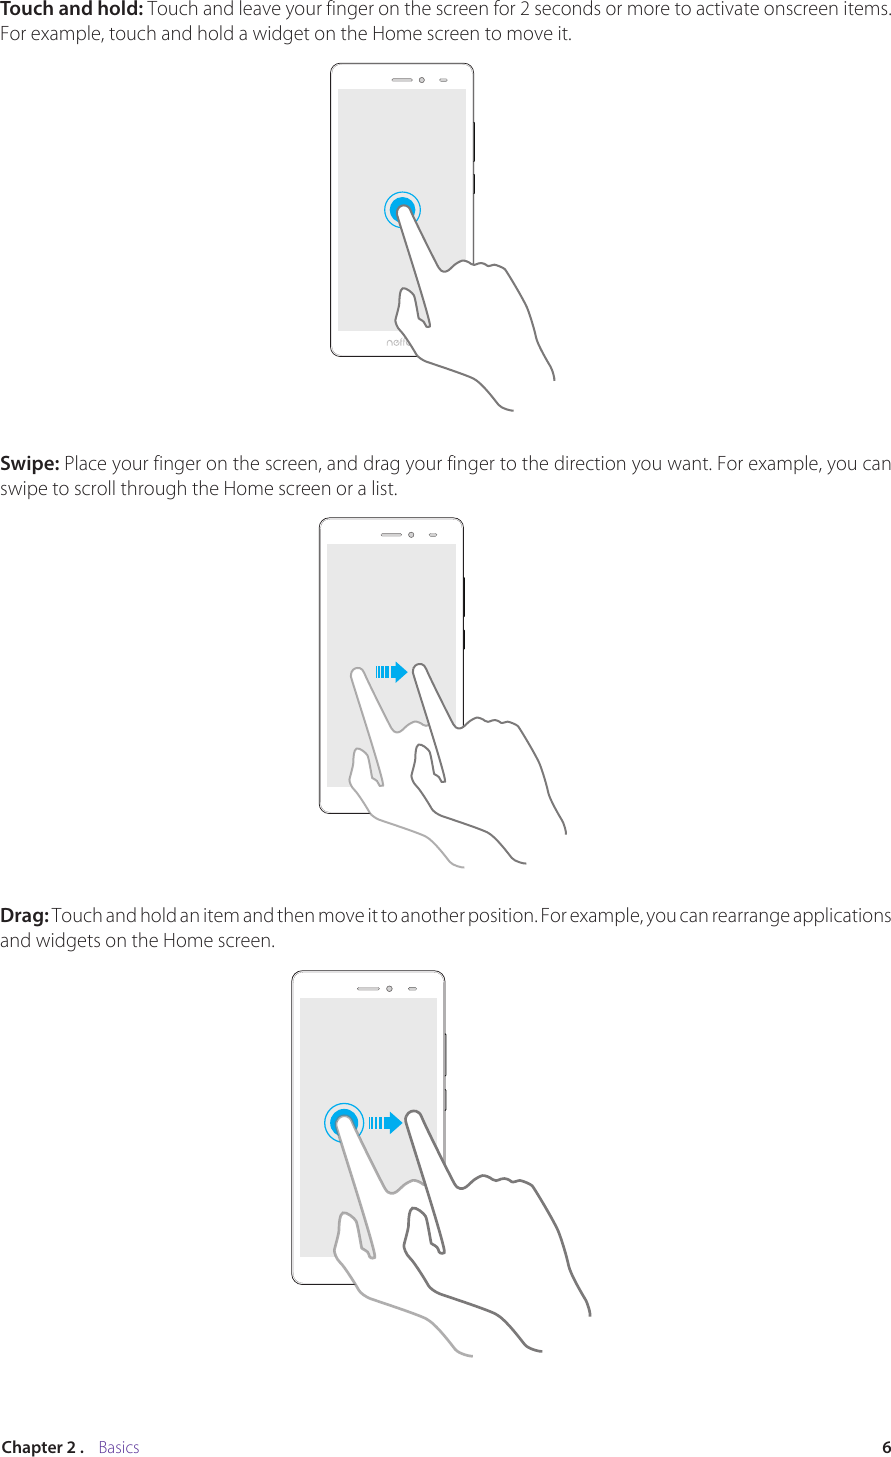 6Chapter 2 .    BasicsTouch and hold: Touch and leave your finger on the screen for 2 seconds or more to activate onscreen items. For example, touch and hold a widget on the Home screen to move it. Swipe: Place your finger on the screen, and drag your finger to the direction you want. For example, you can swipe to scroll through the Home screen or a list.Drag: Touch and hold an item and then move it to another position. For example, you can rearrange applications and widgets on the Home screen.